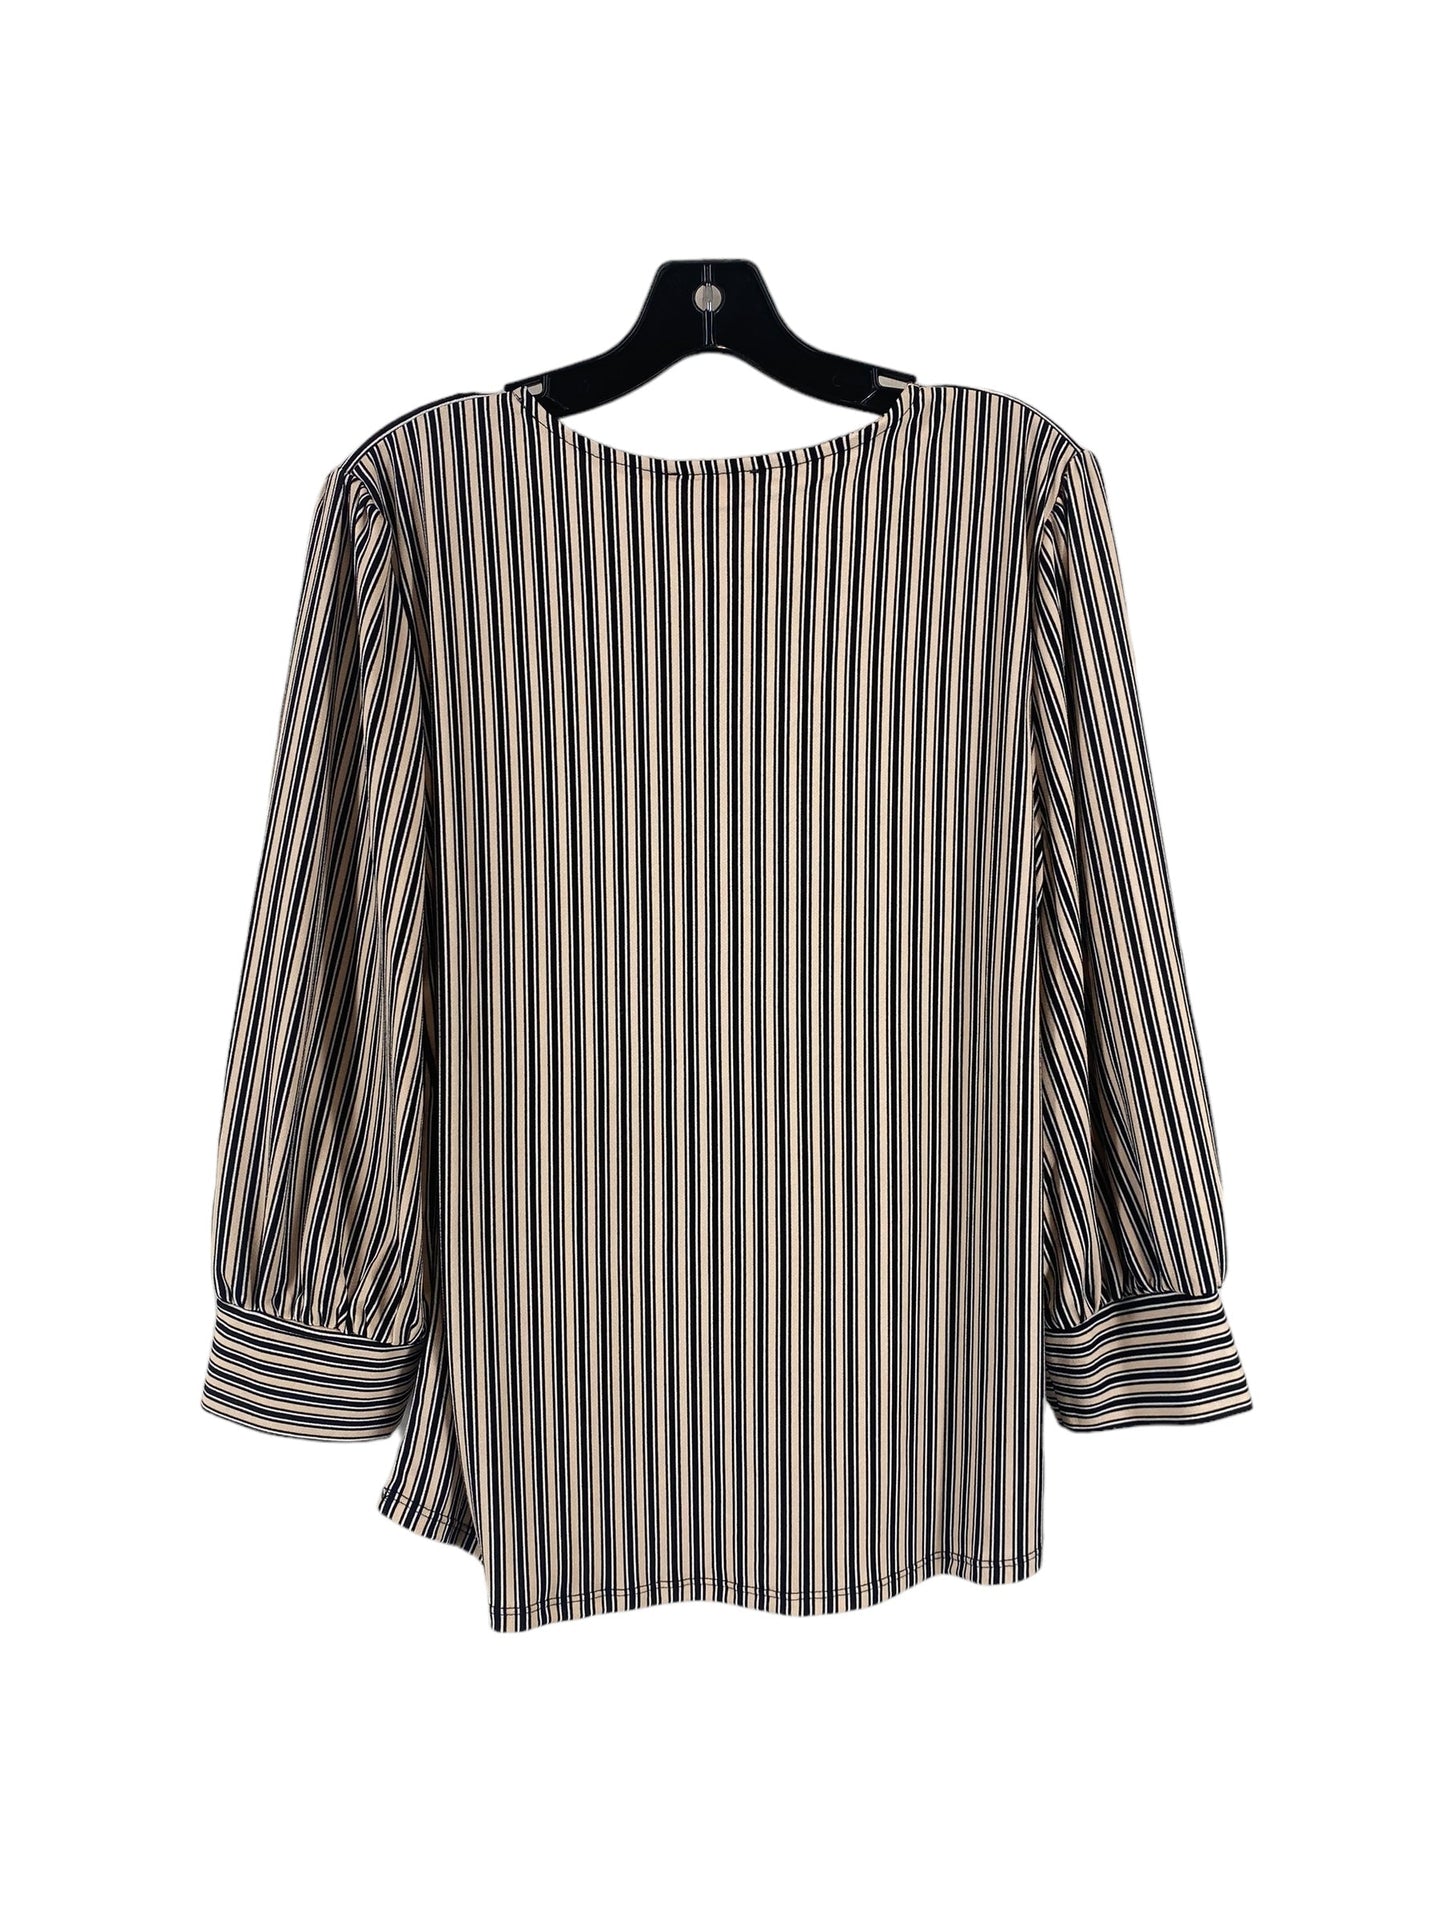 Striped Pattern Top 3/4 Sleeve Adrianna Papell, Size L